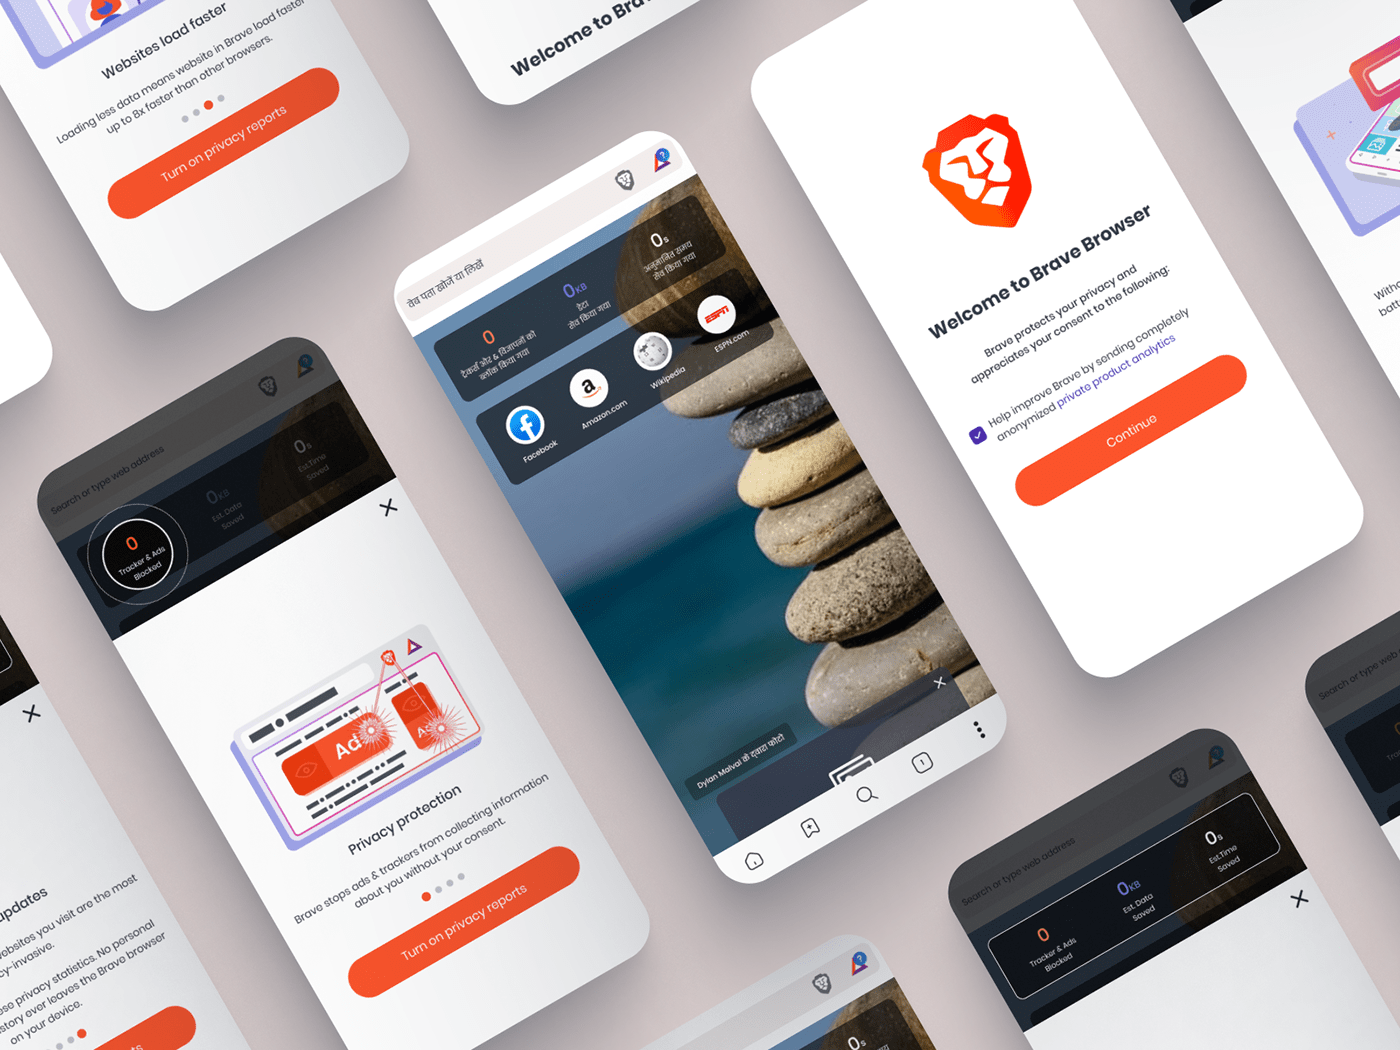 Brave VPN Browser Apps UI Design. Hope like it!!

Available For work

Shreay.goyal@uiuxlabs.in